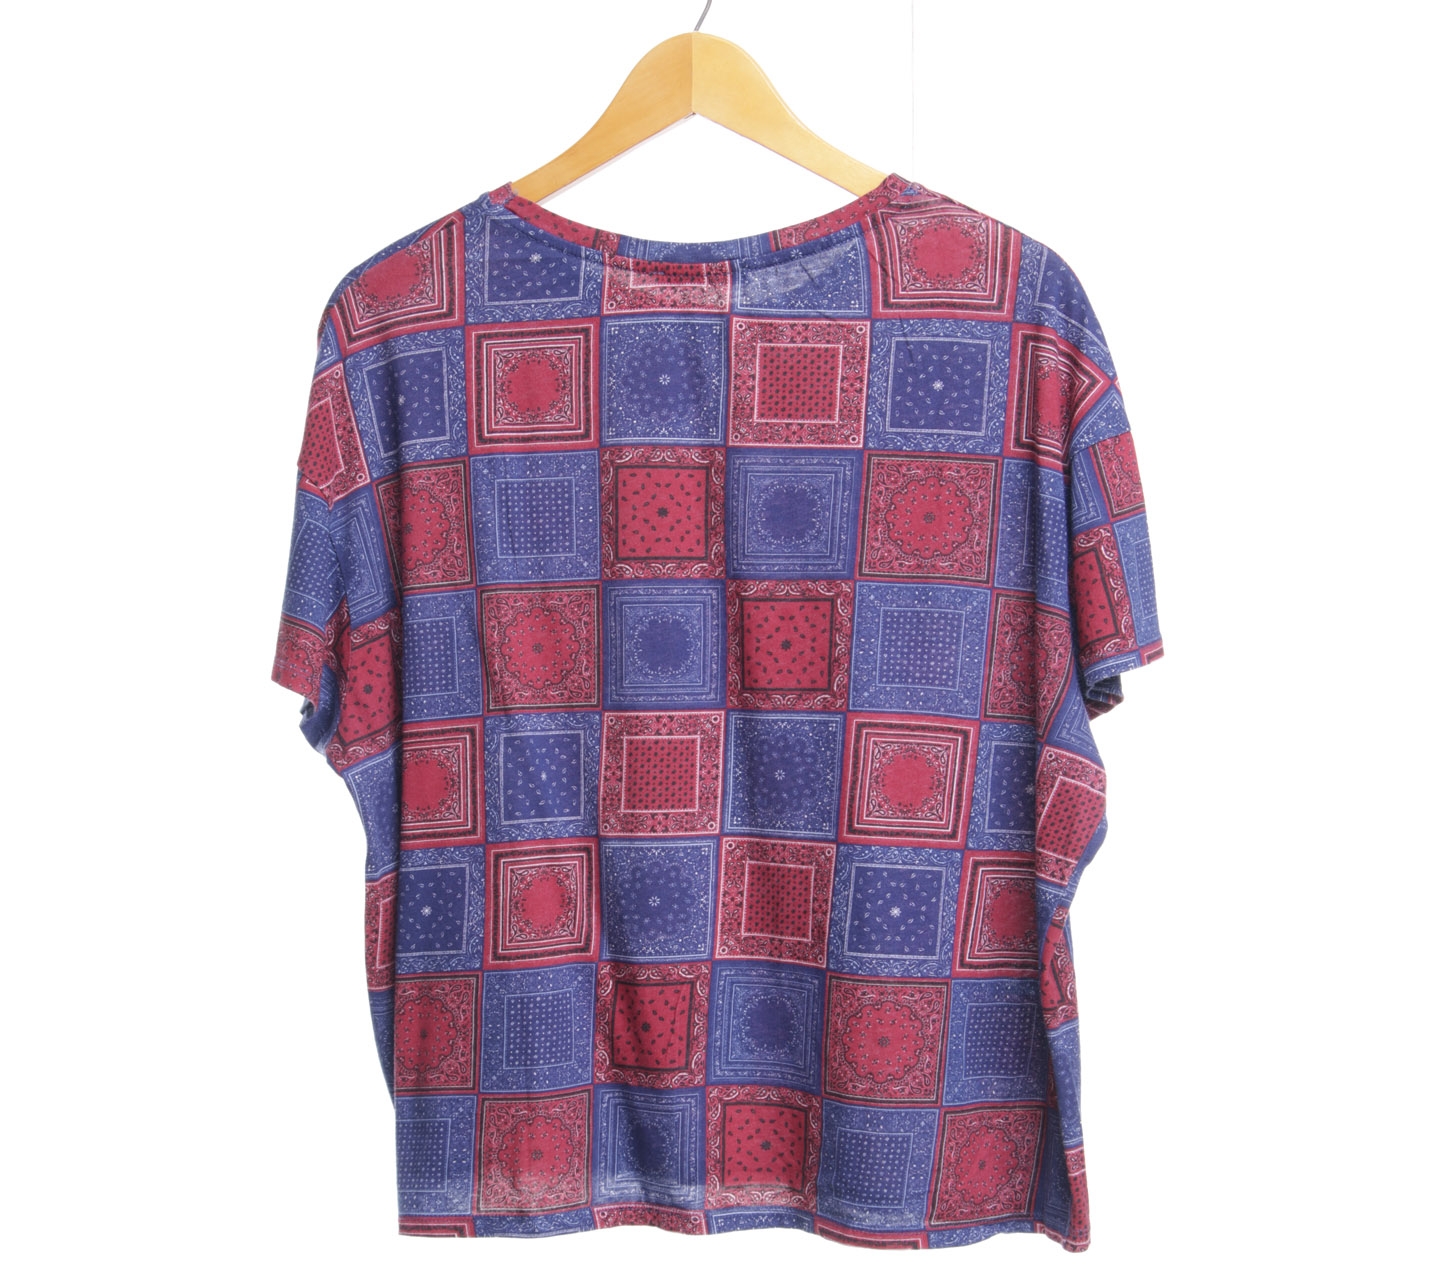 Zara Red And Blue Patterned Blouse